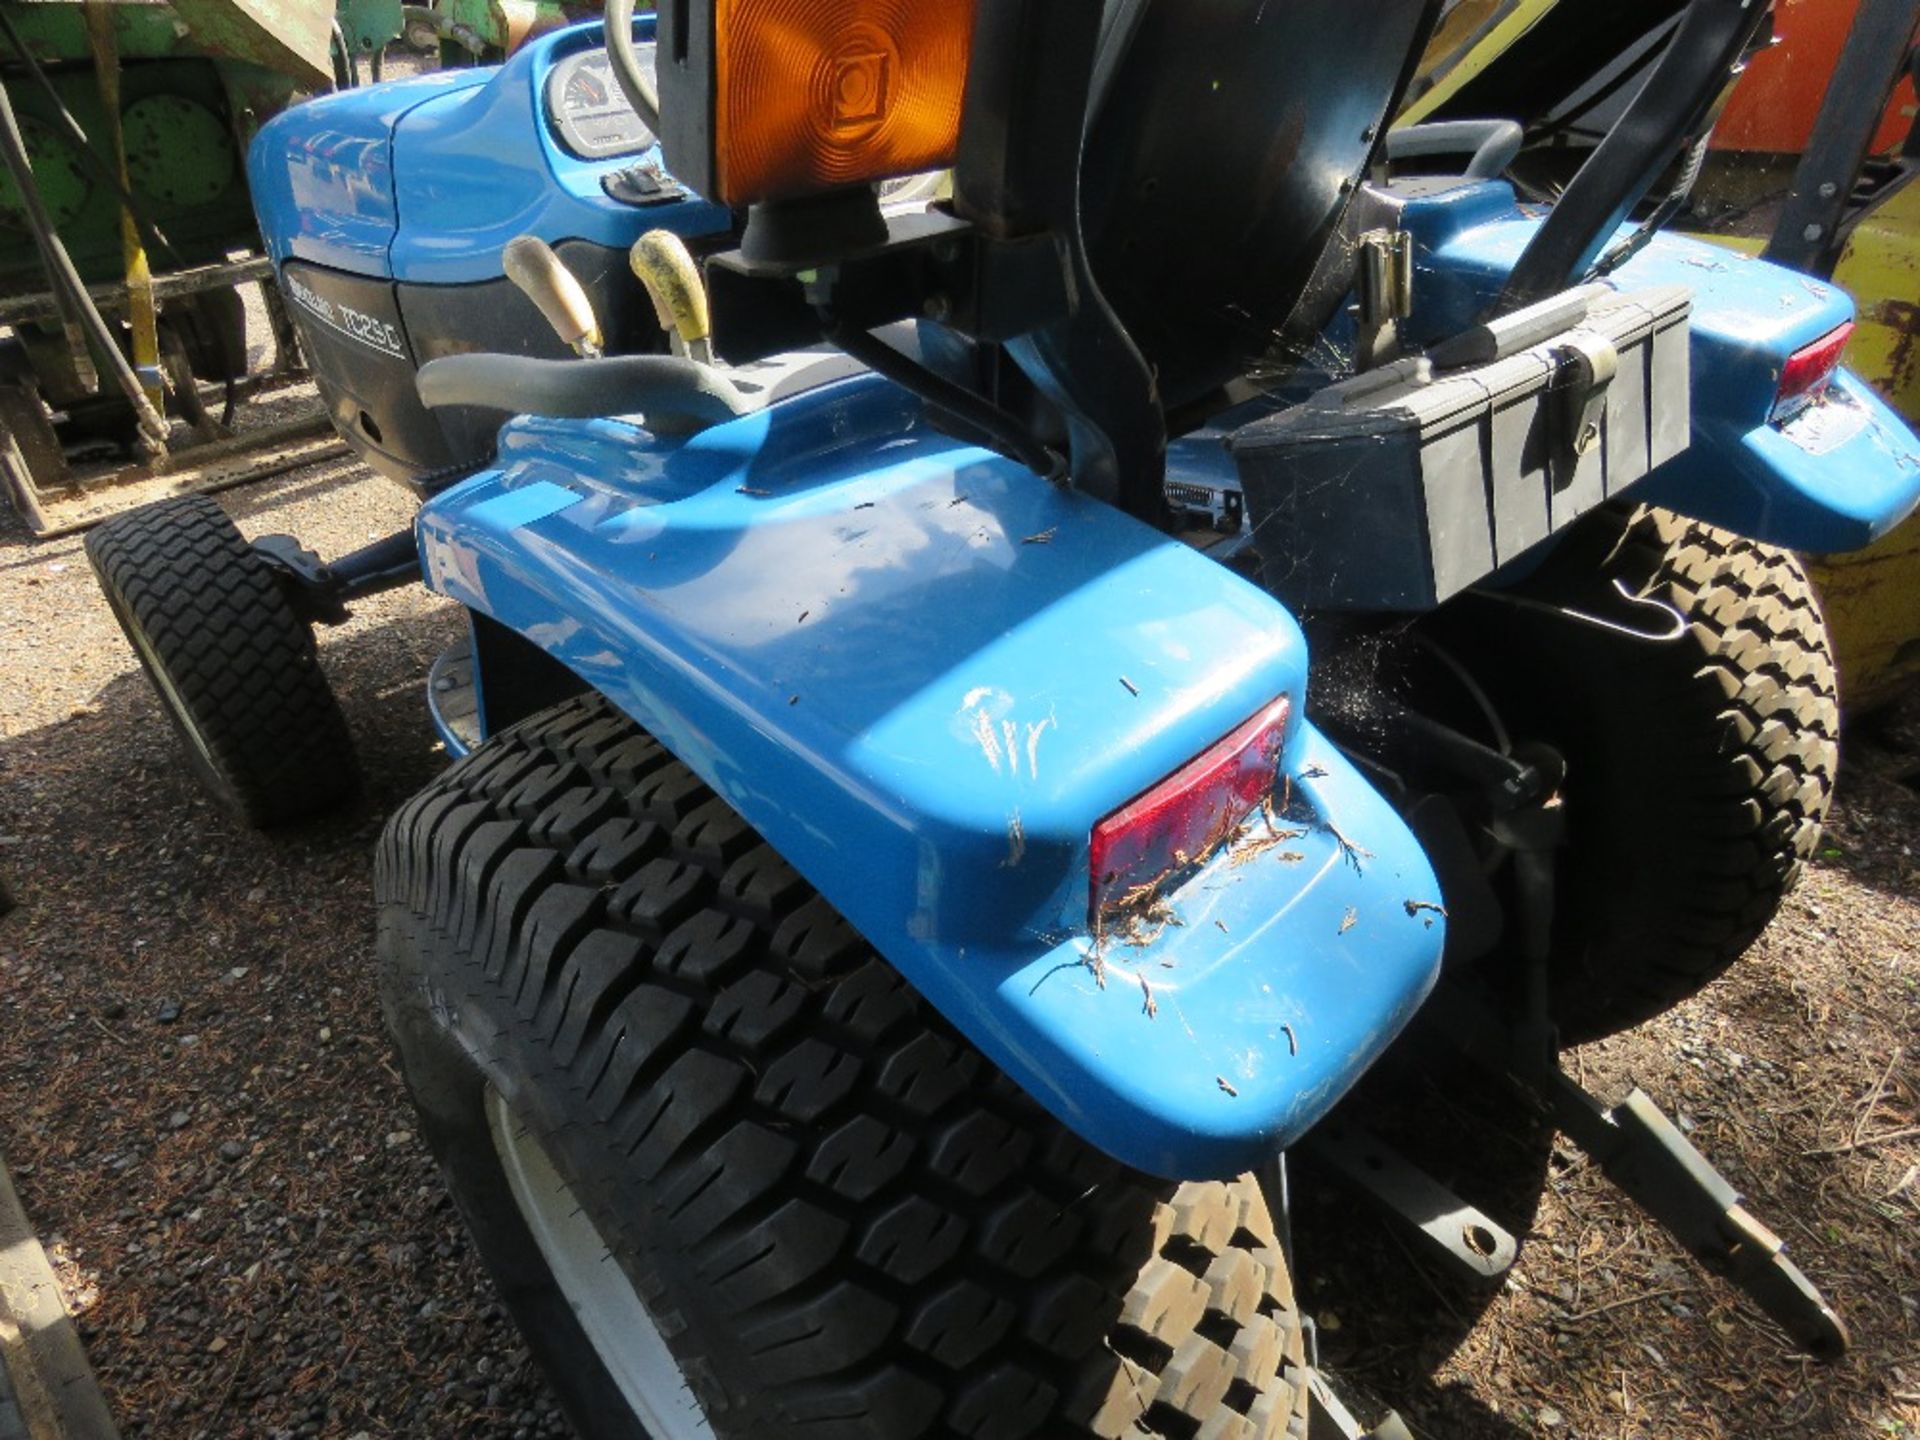 NEW HOLLAND TC29D 24D TRACTOR WITH GRASS TYRES, 3013 REC HOURS. WHEN TESTED WAS SEEN TO DRIVE, STEER - Image 6 of 6